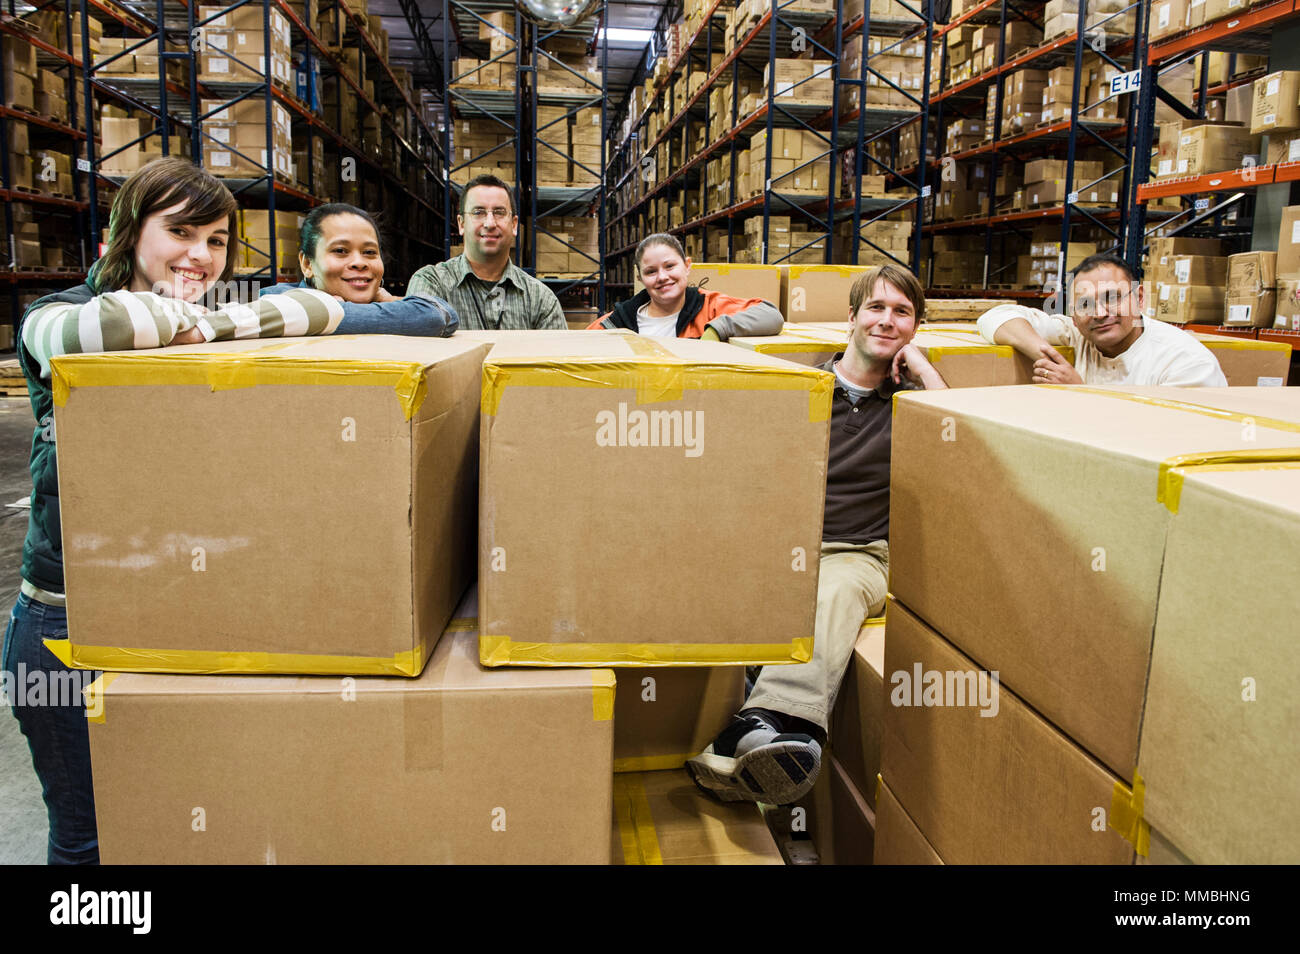 Team portrait of multi-ethnic male and female warehouse workers in a large distrubiton warehouse full of products stored on pallets in cardboard boxes Stock Photo